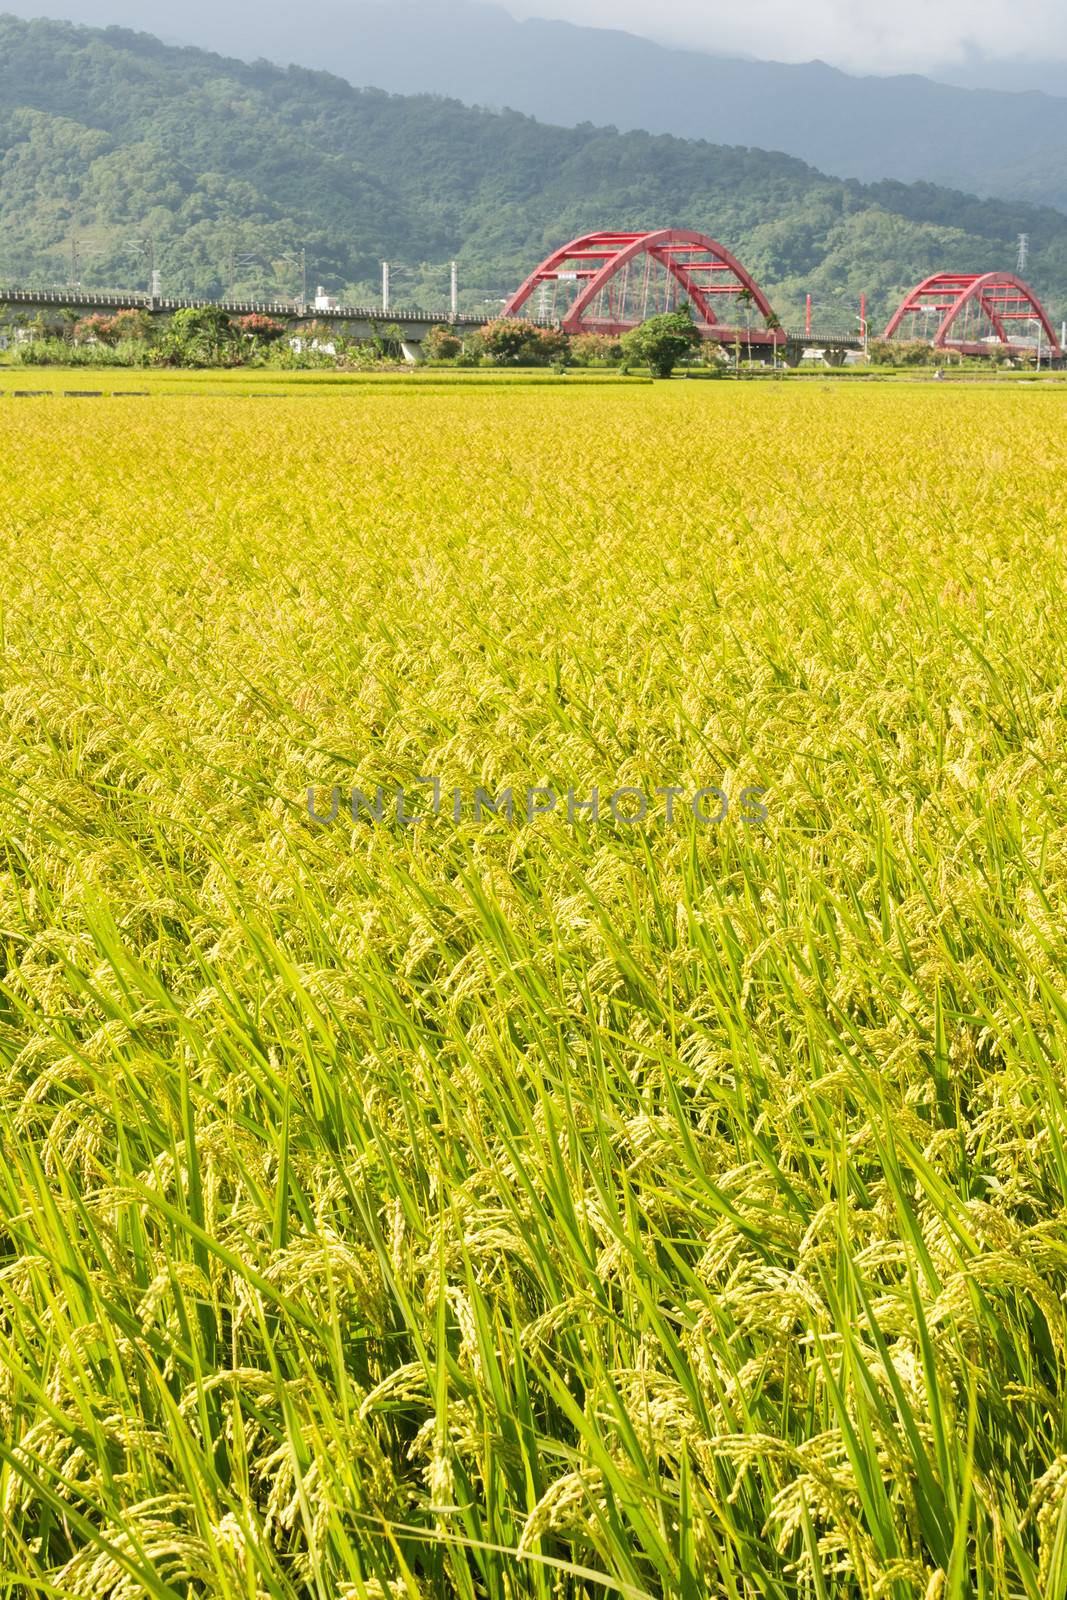 Rural scenery with golden paddy rice farm and red bridge in Hualien, Taiwan, Asia.